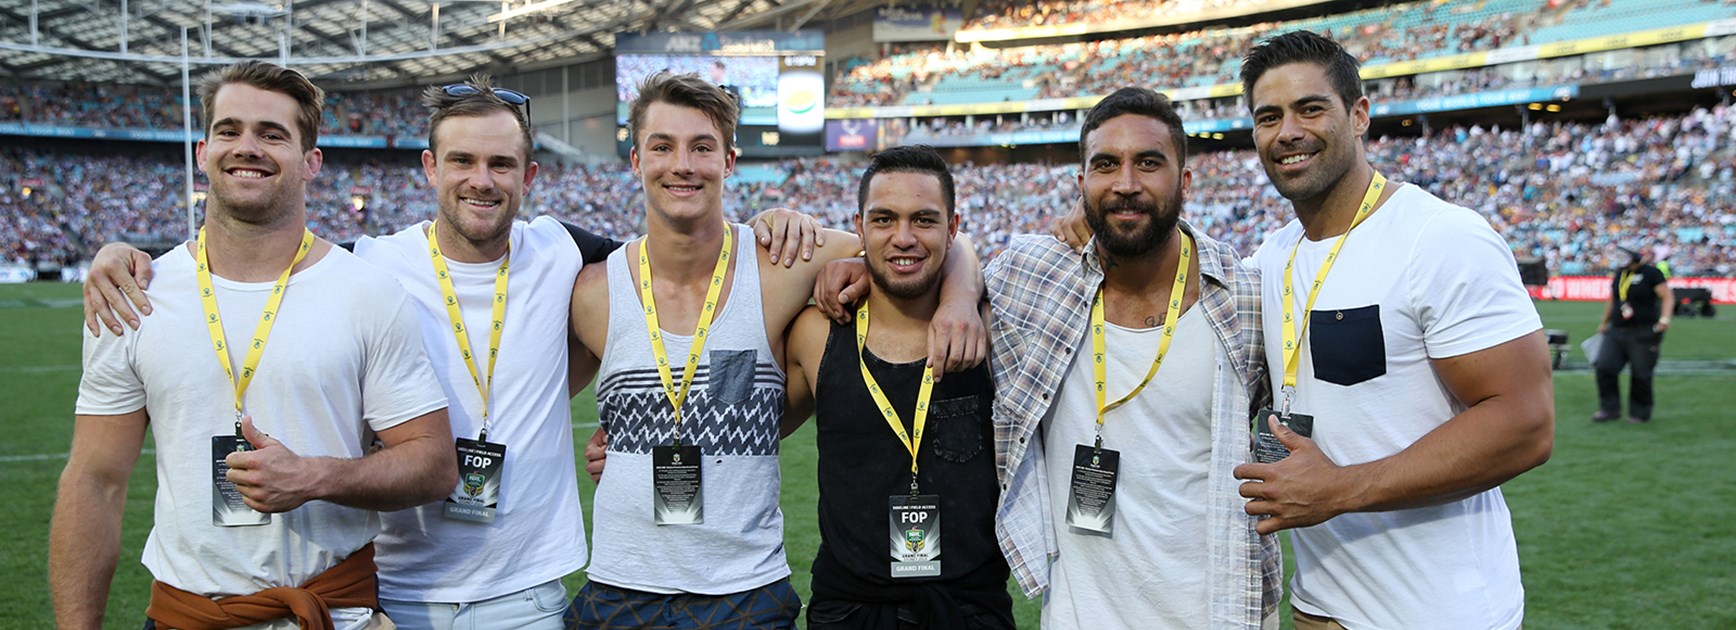 The remaining six NRL Rookies at the 2015 NRL Grand Final.